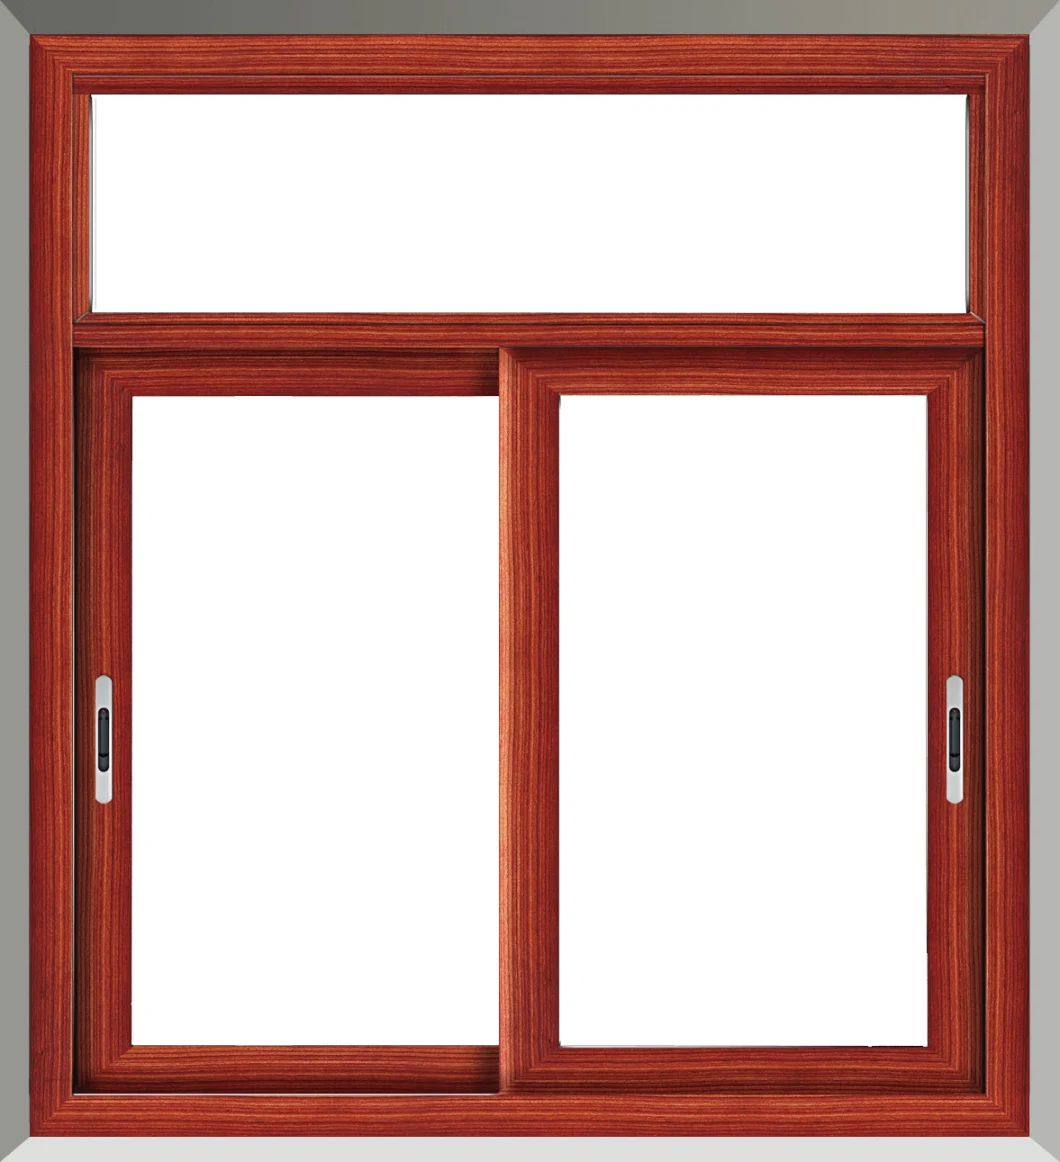 Aluminum Sliding Window with Tempered Glass/Insulating Glass (3 Tracks)